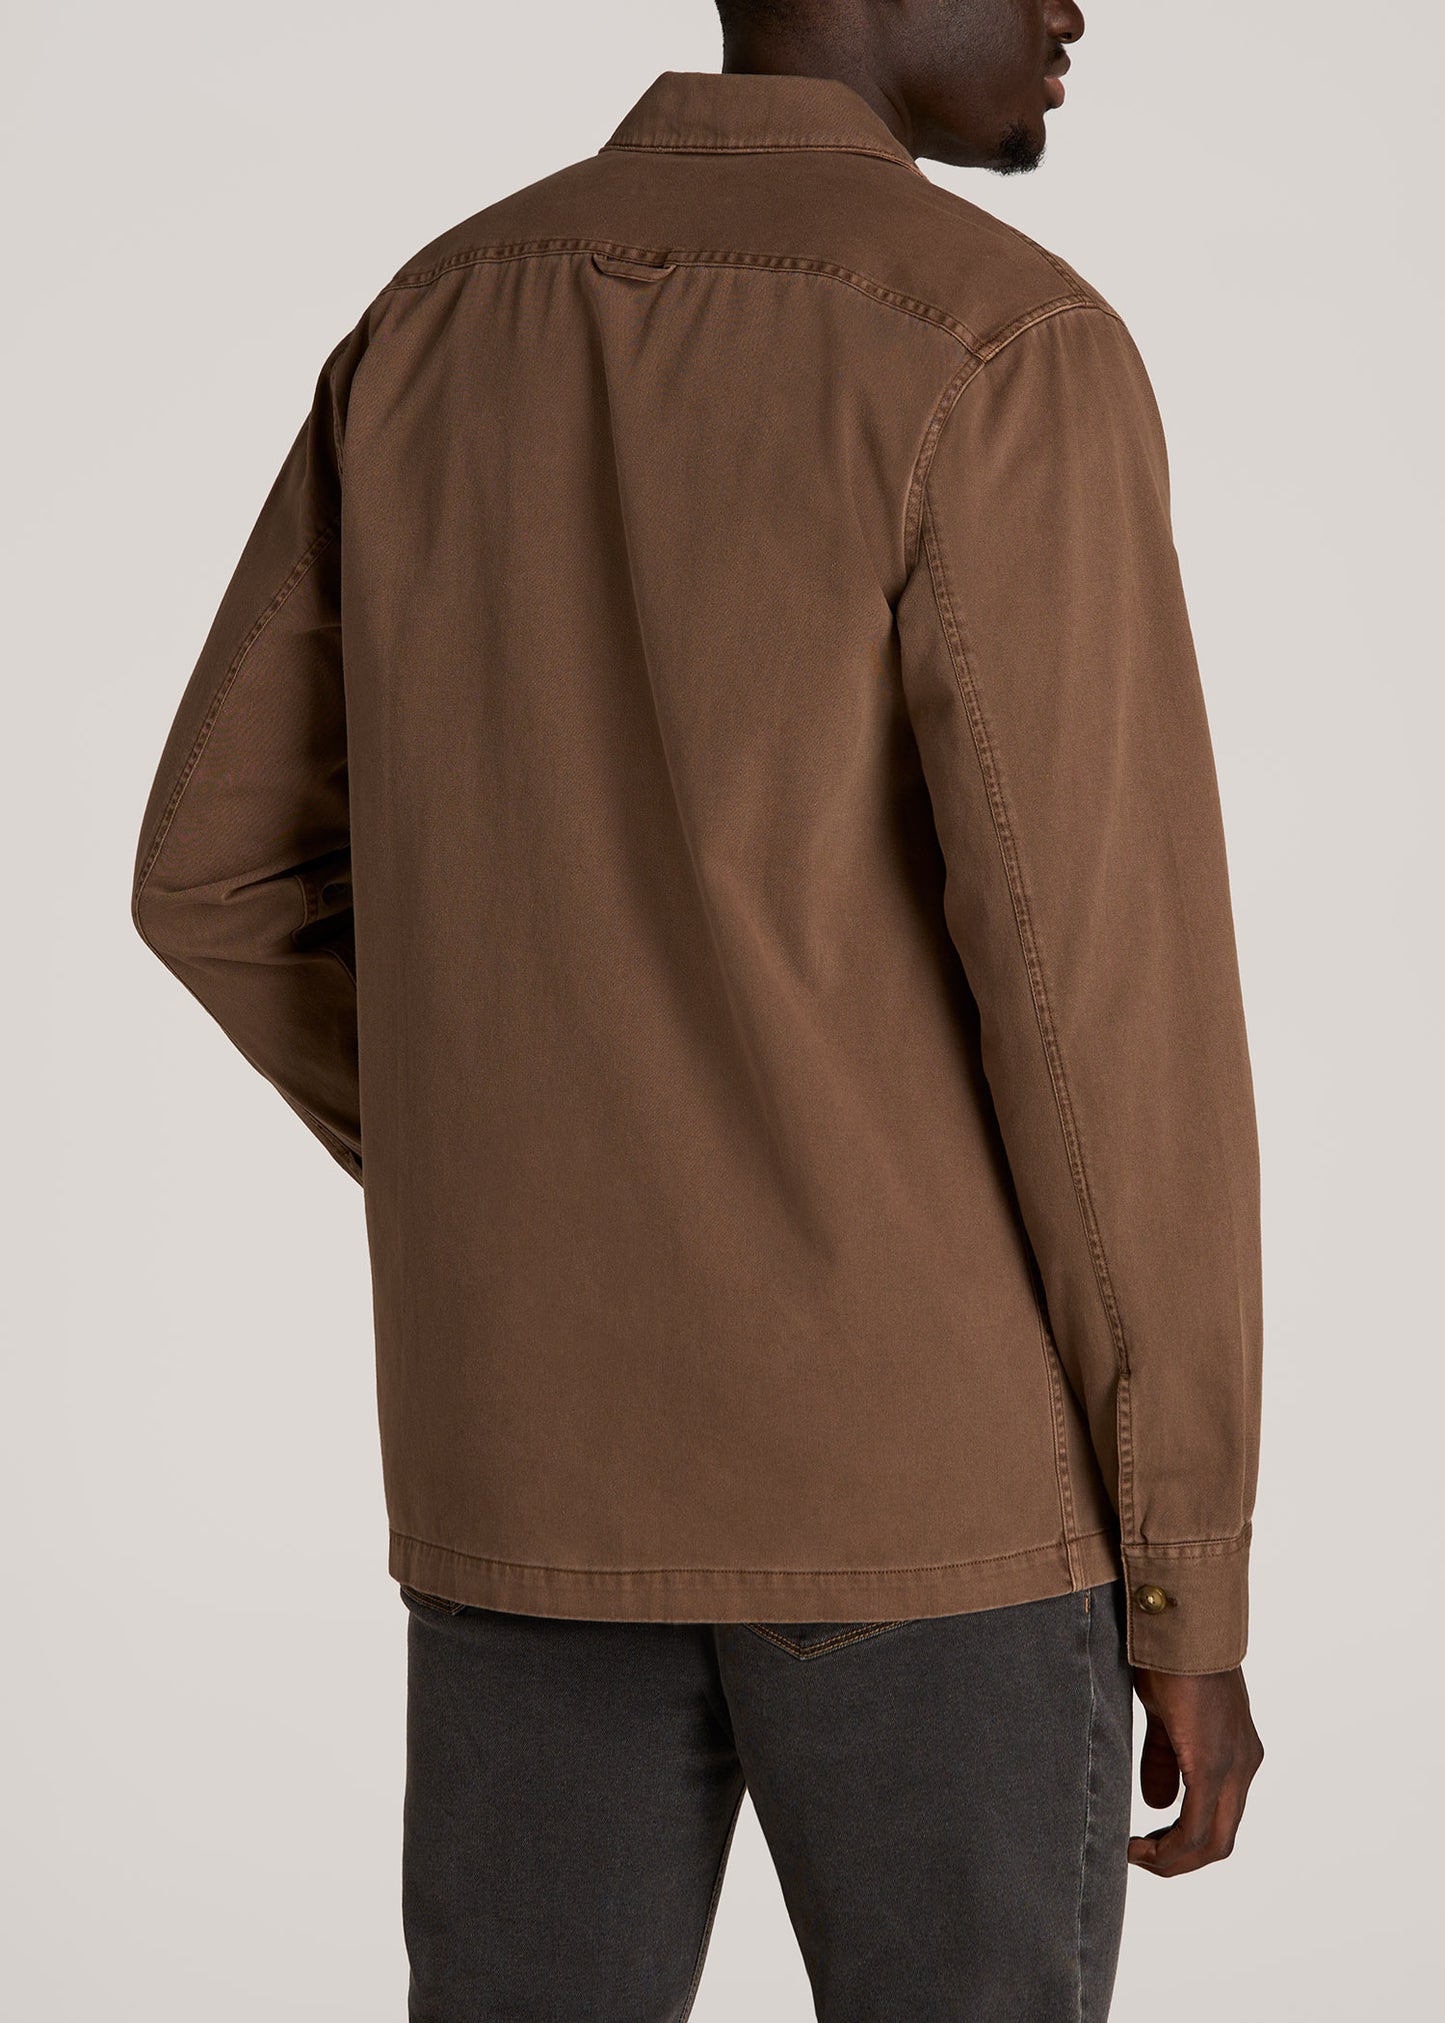 Garment Dyed Lightweight Overshirt For Tall Men in Tobacco Brown